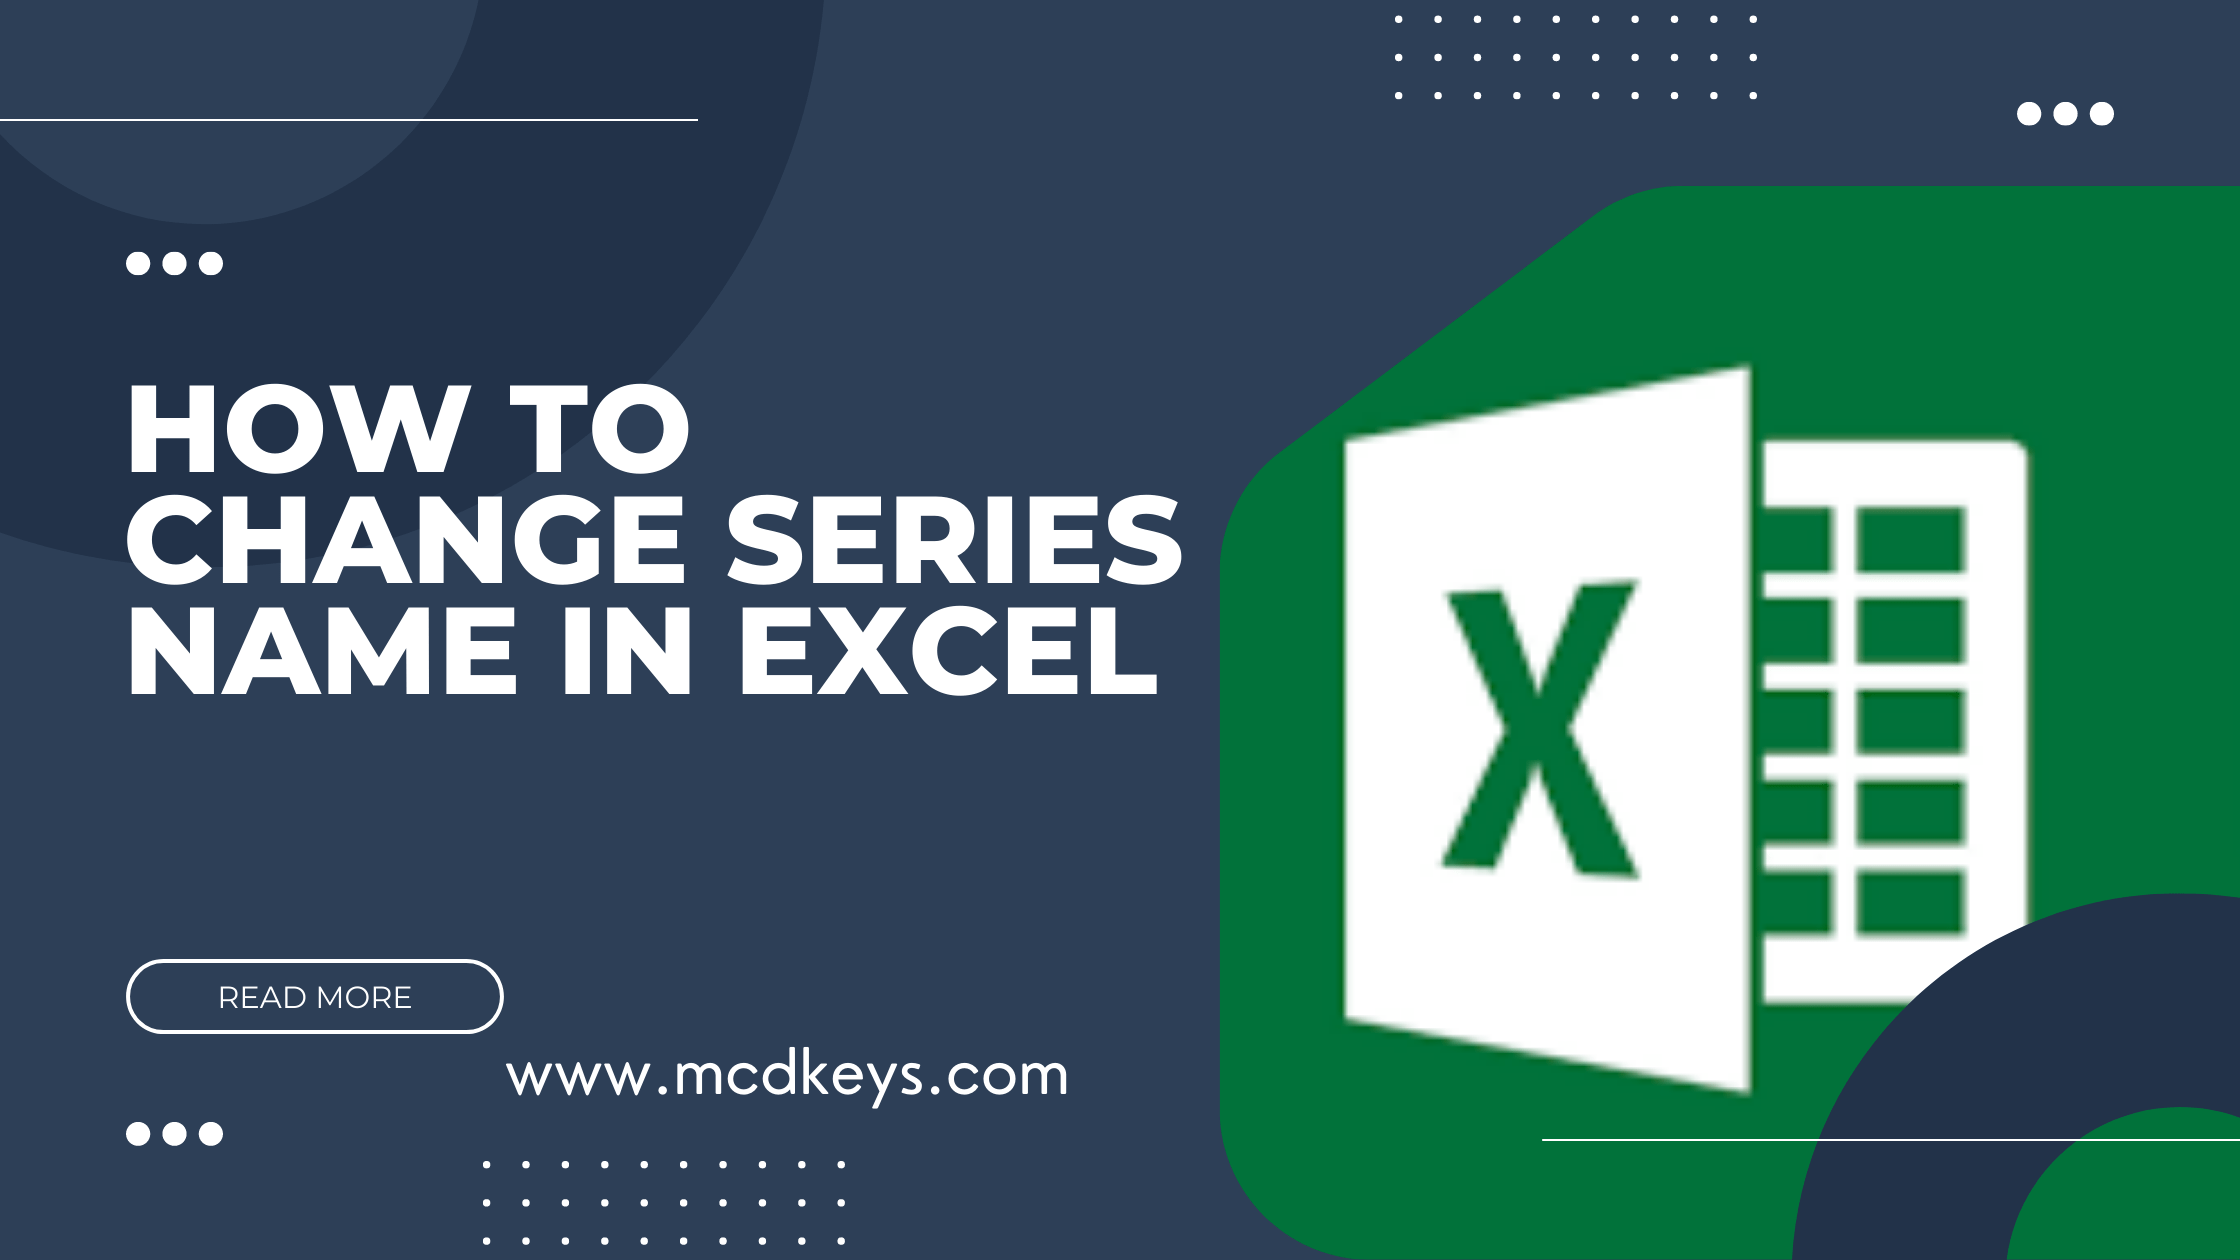 How to Change Series Name in Excel